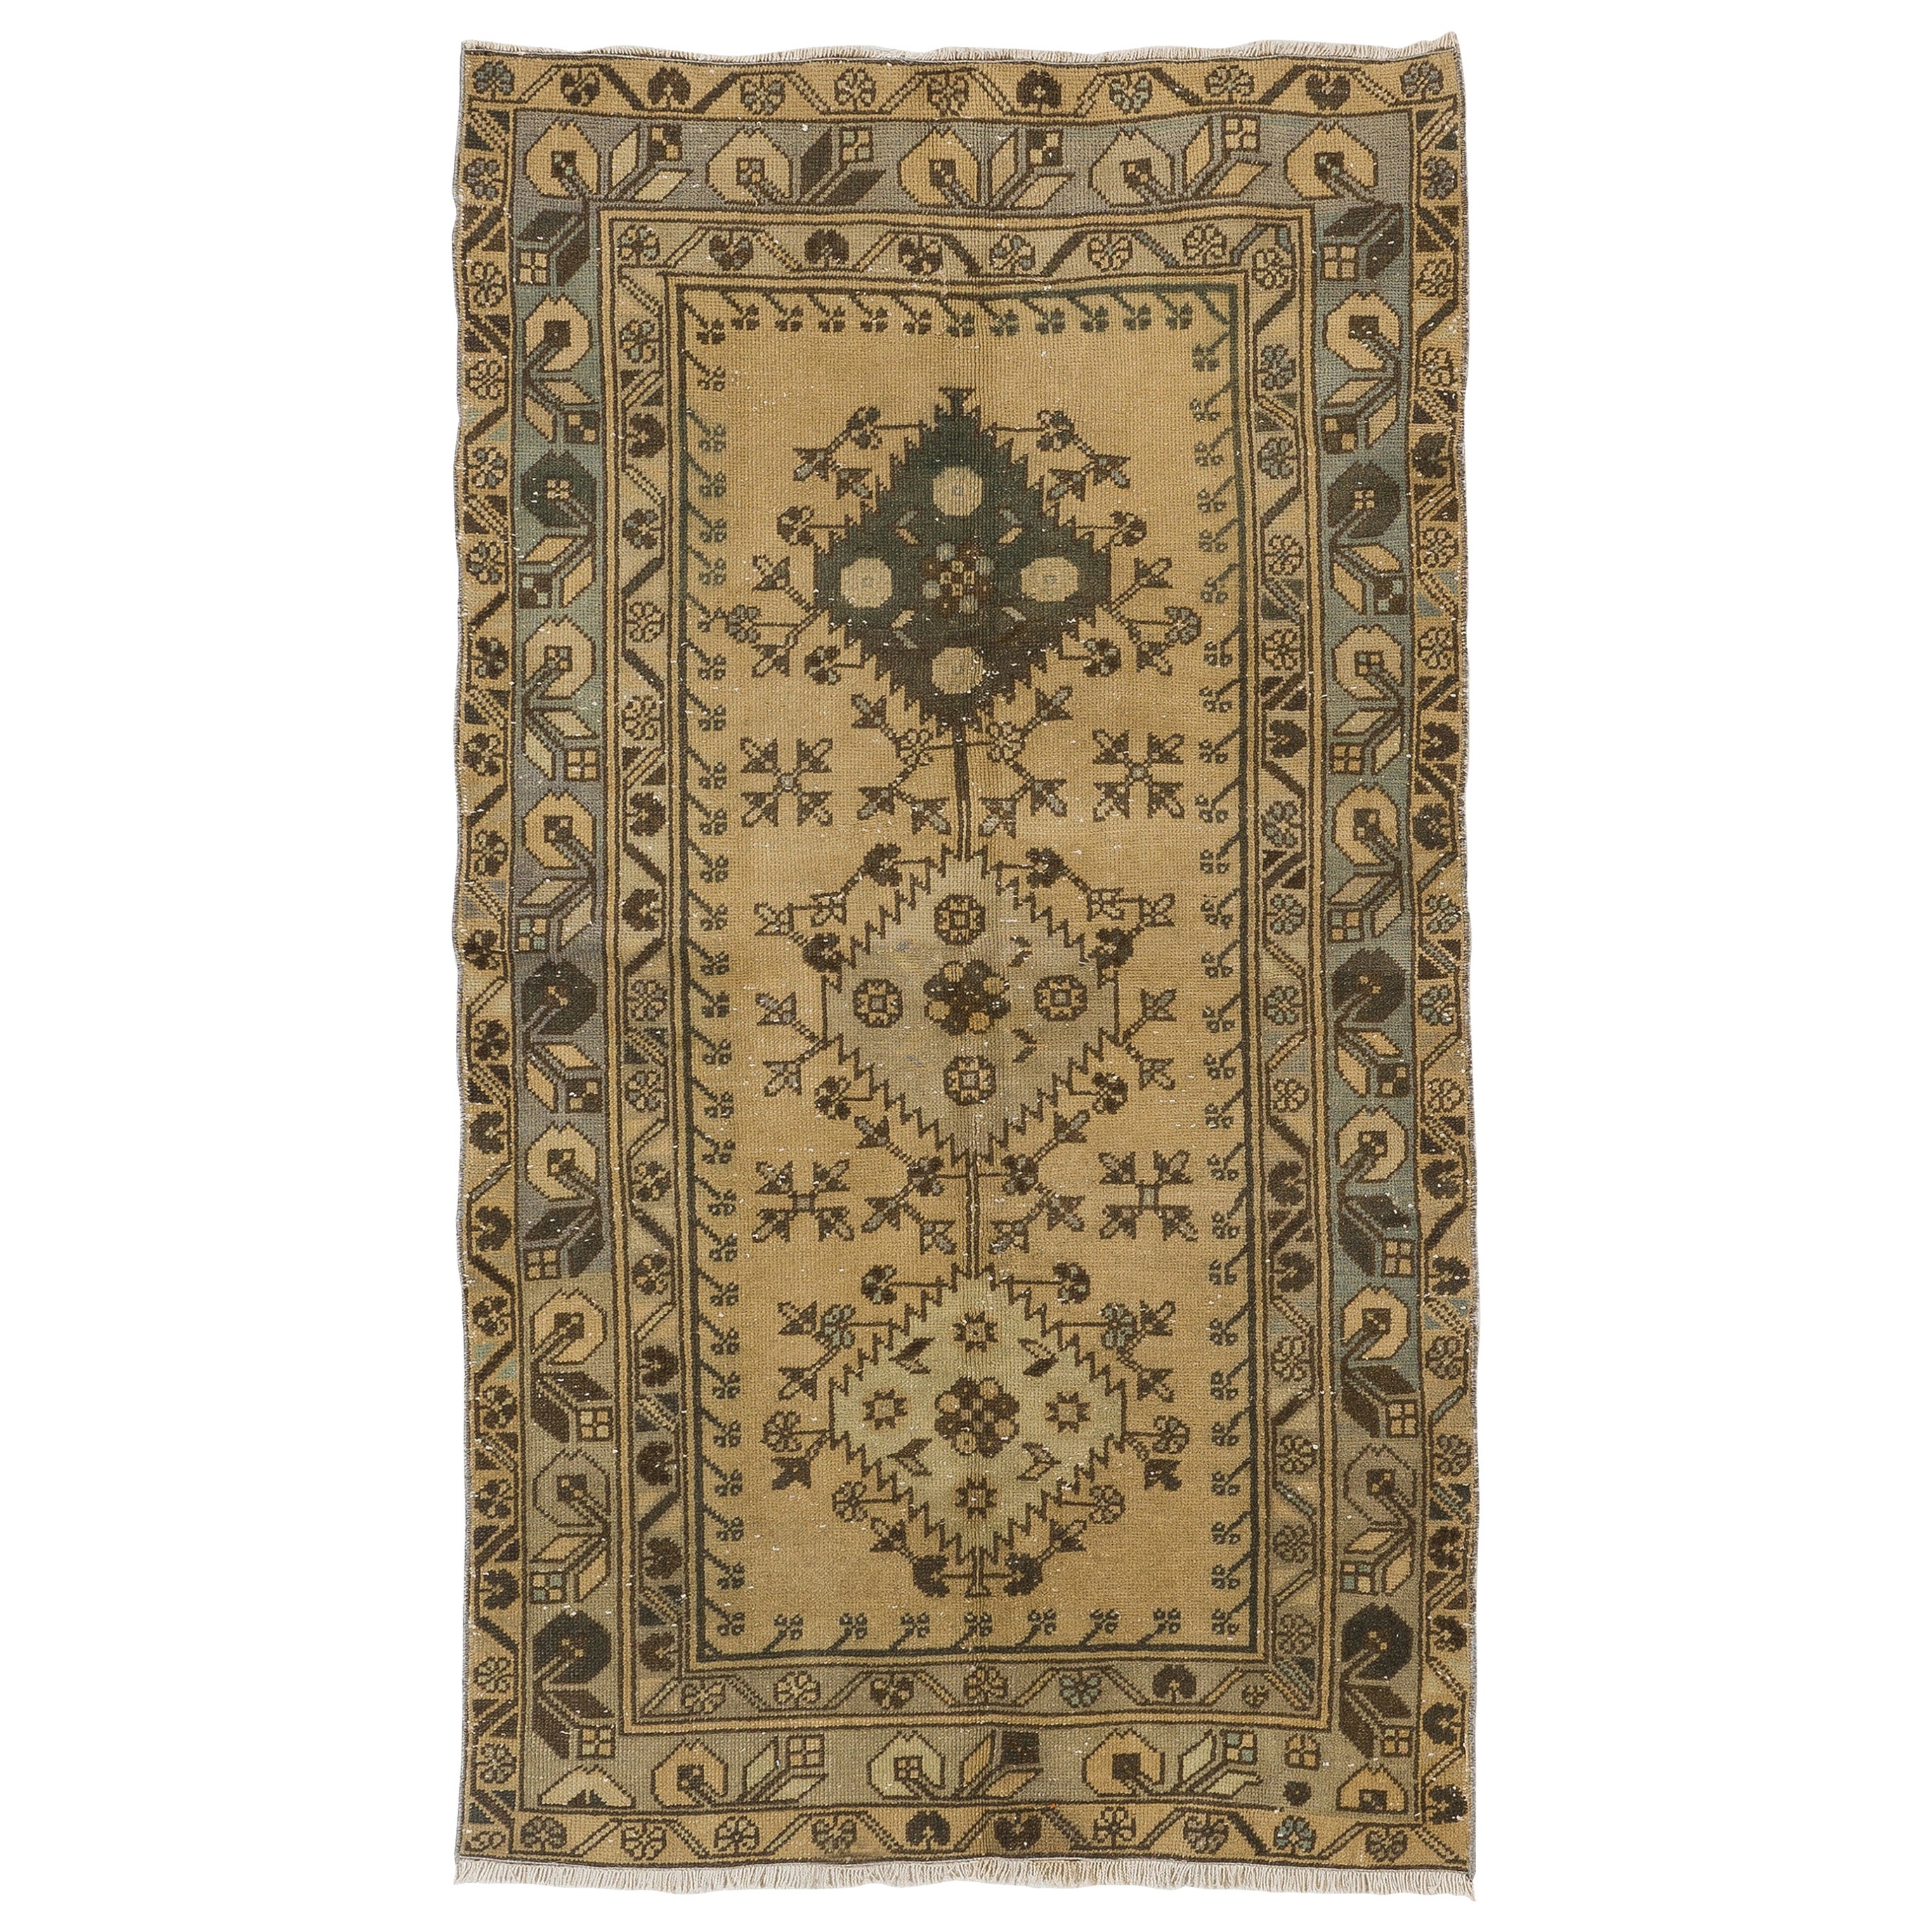 3.5x6.3 Ft One of a Kind Handmade Vintage Anatolian Oushak Accent Rug in Beige